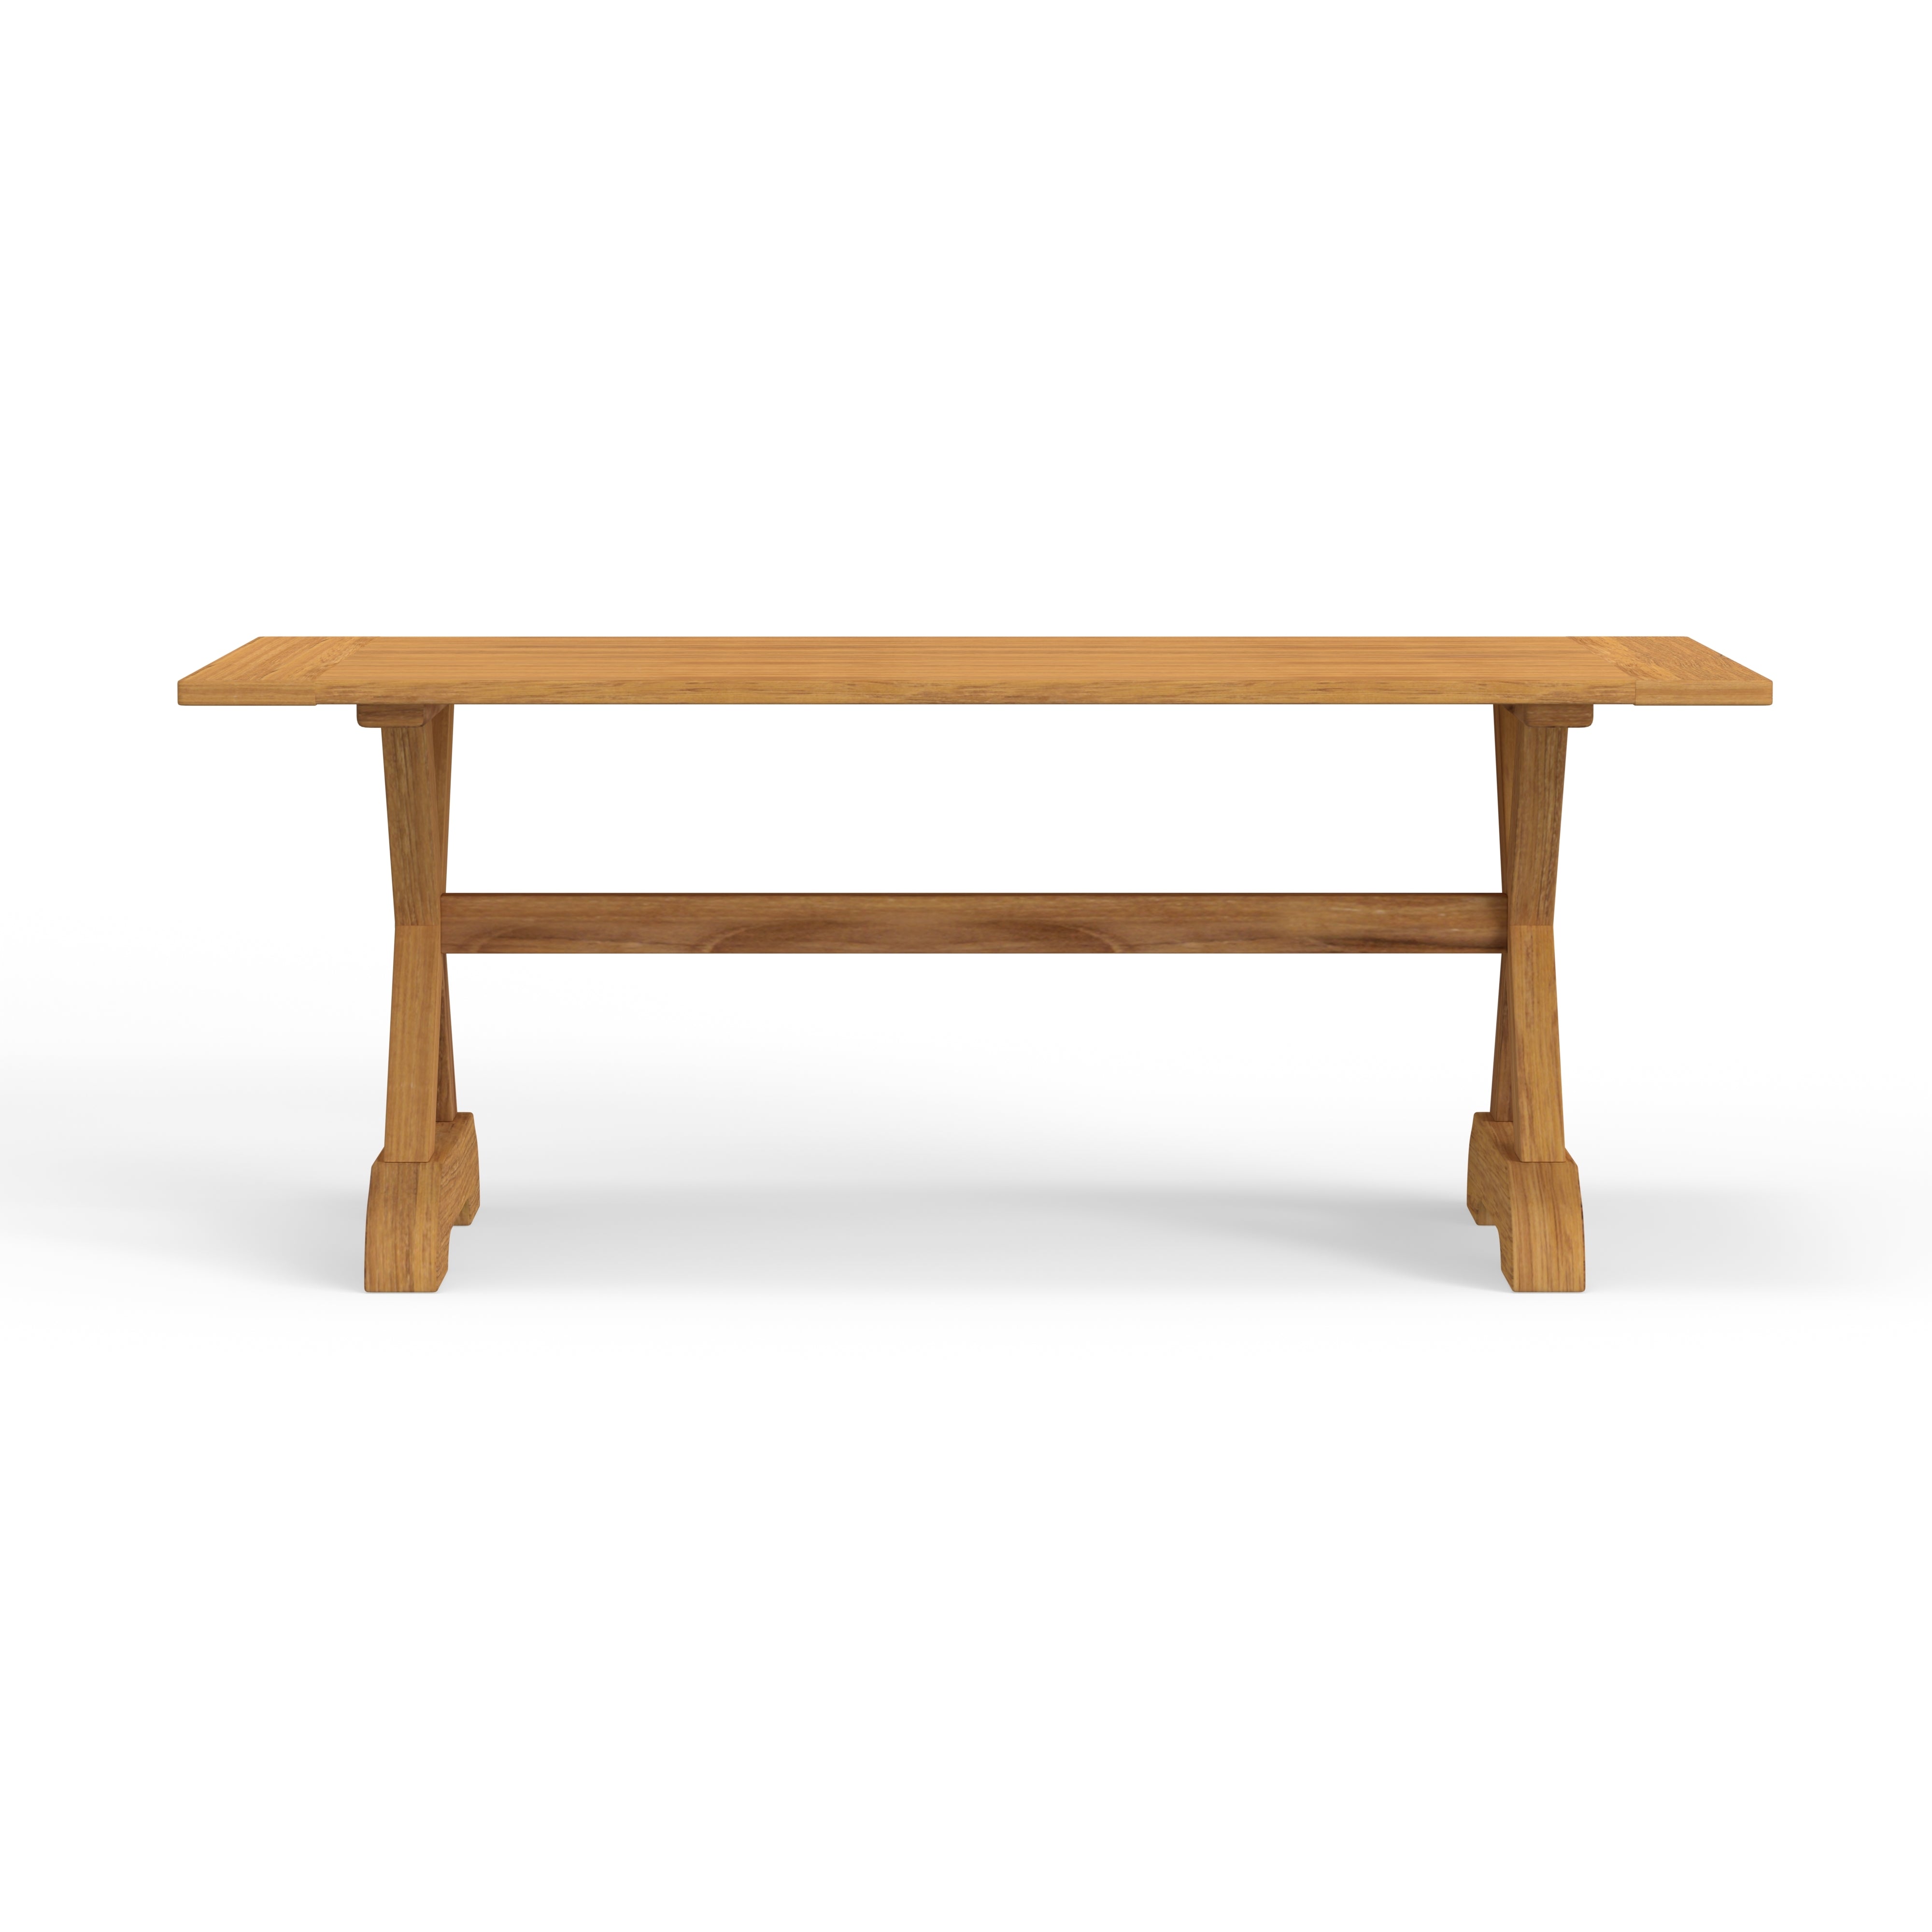 Best Looking Outdoor Teak Trestle Table That Will Last Forever